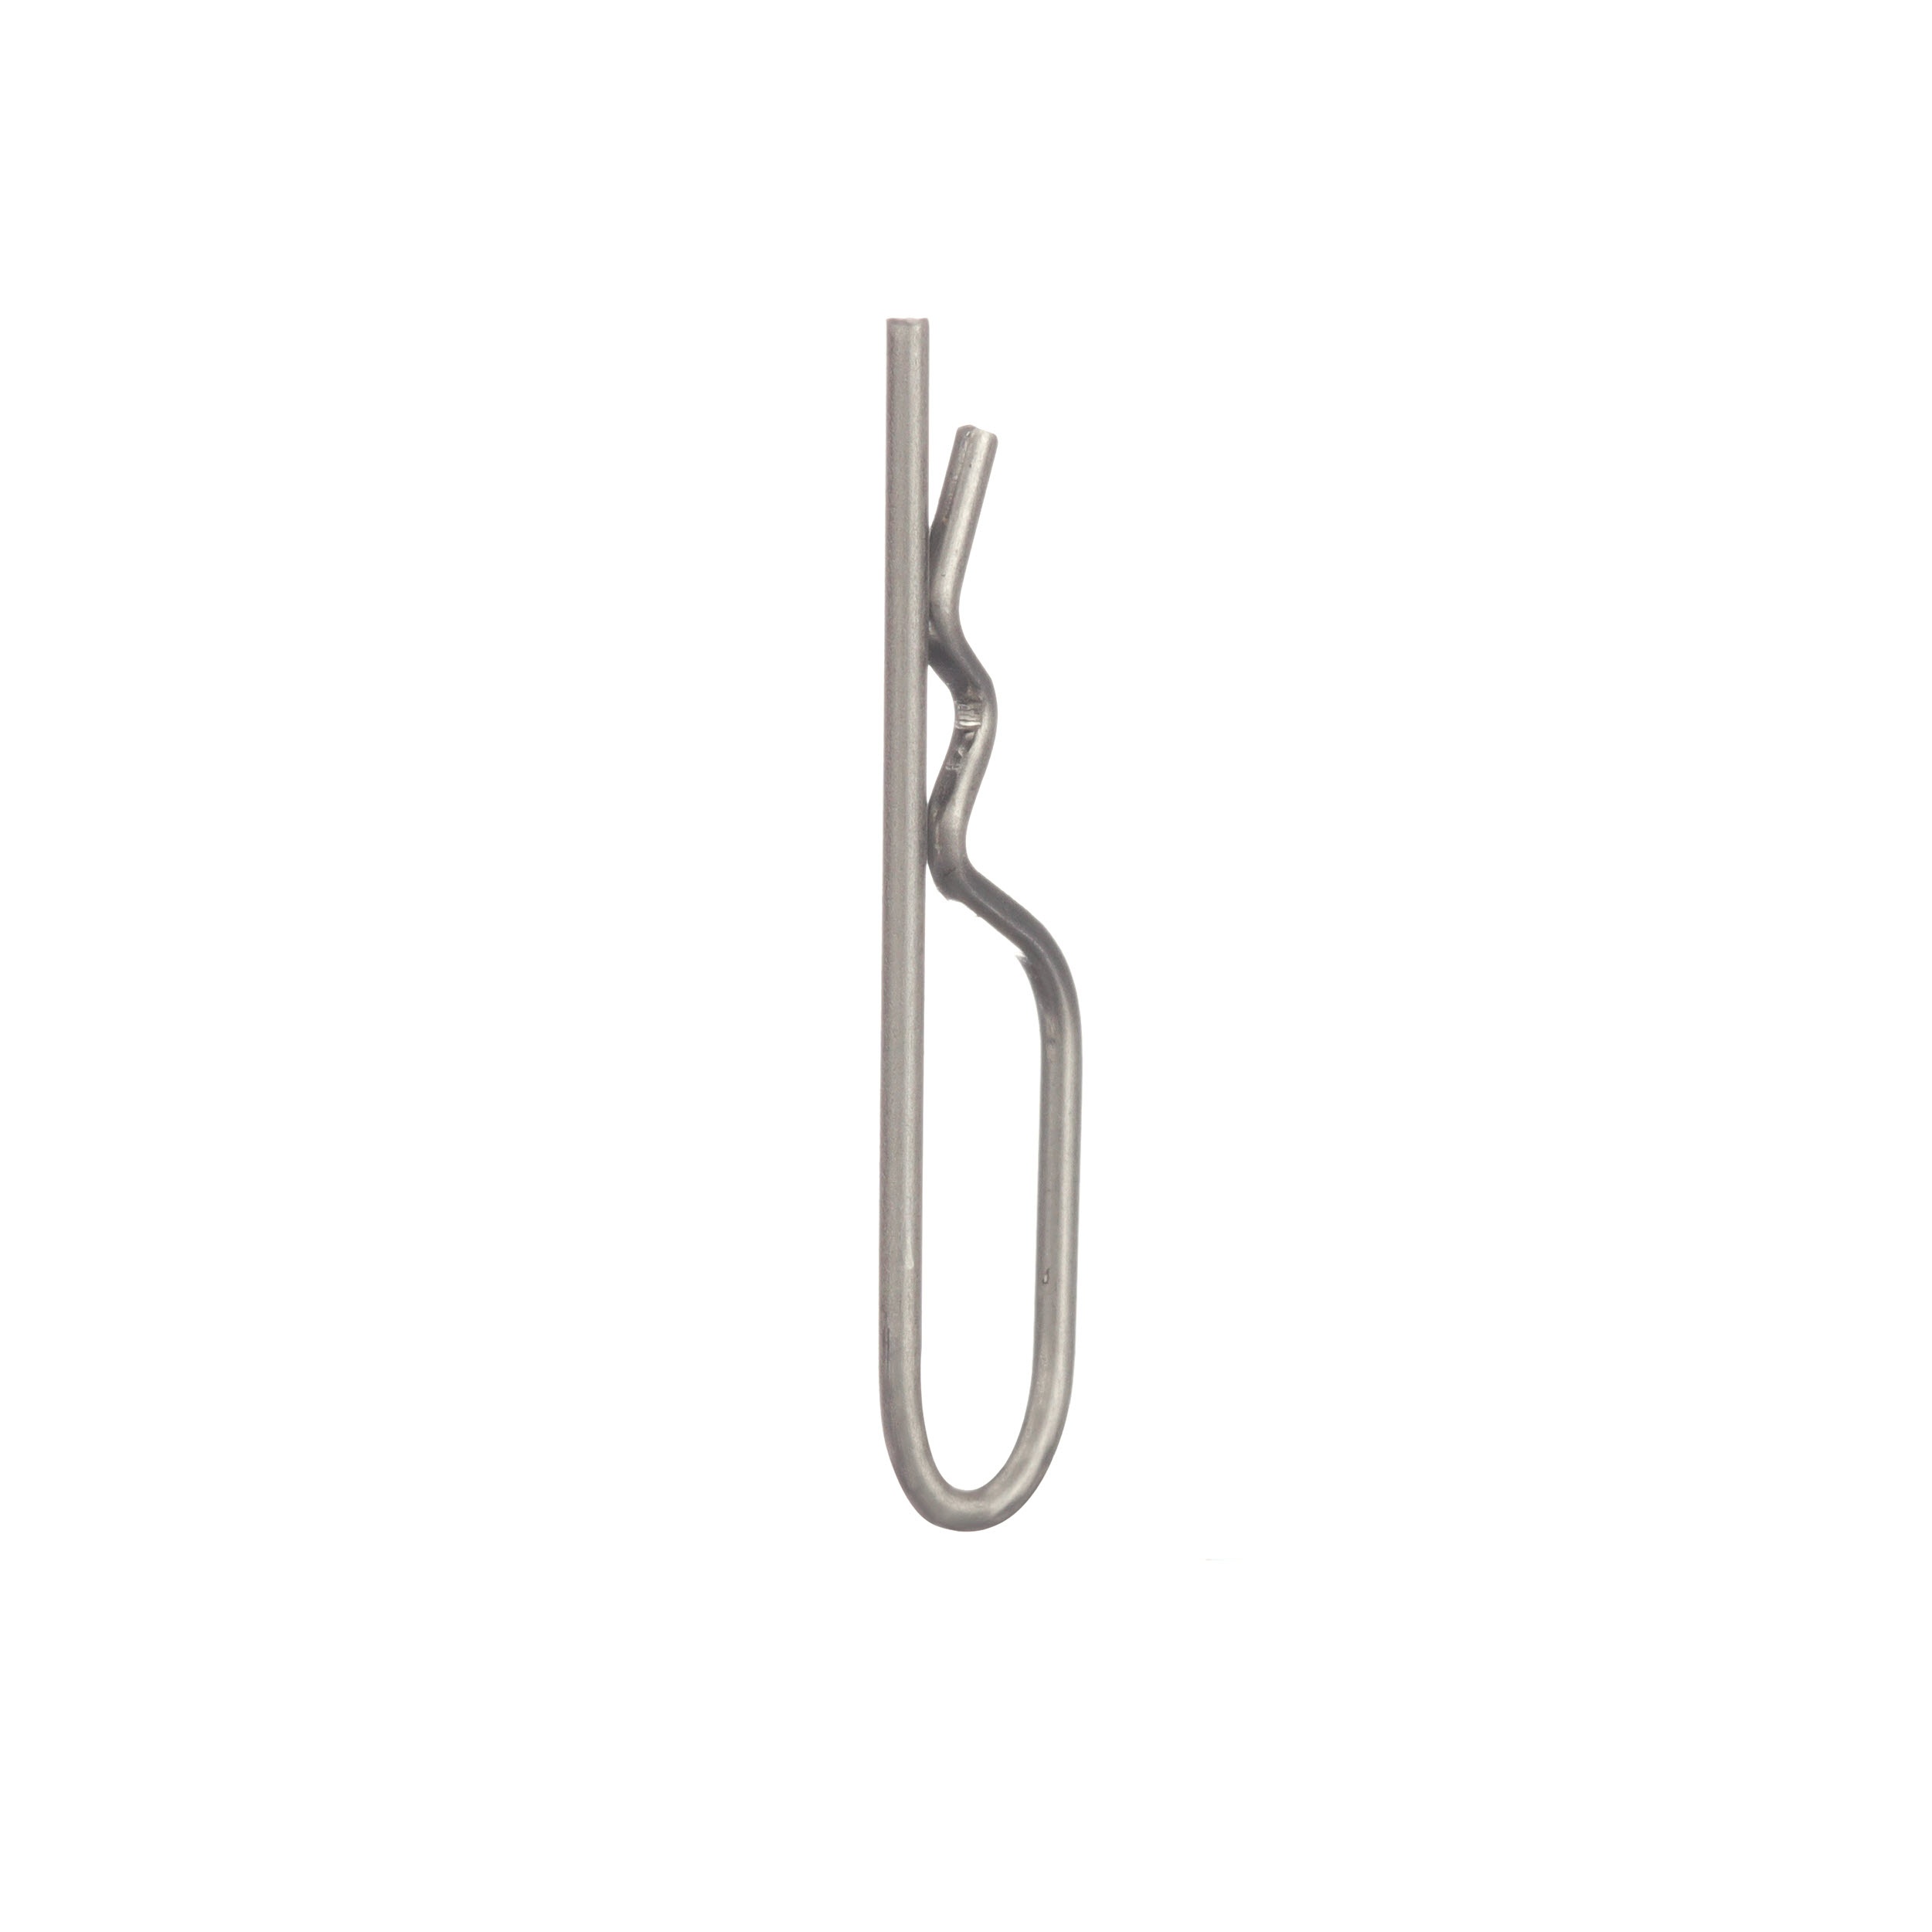 Custom Stainless Steel Cotter Pins for Medical Applications